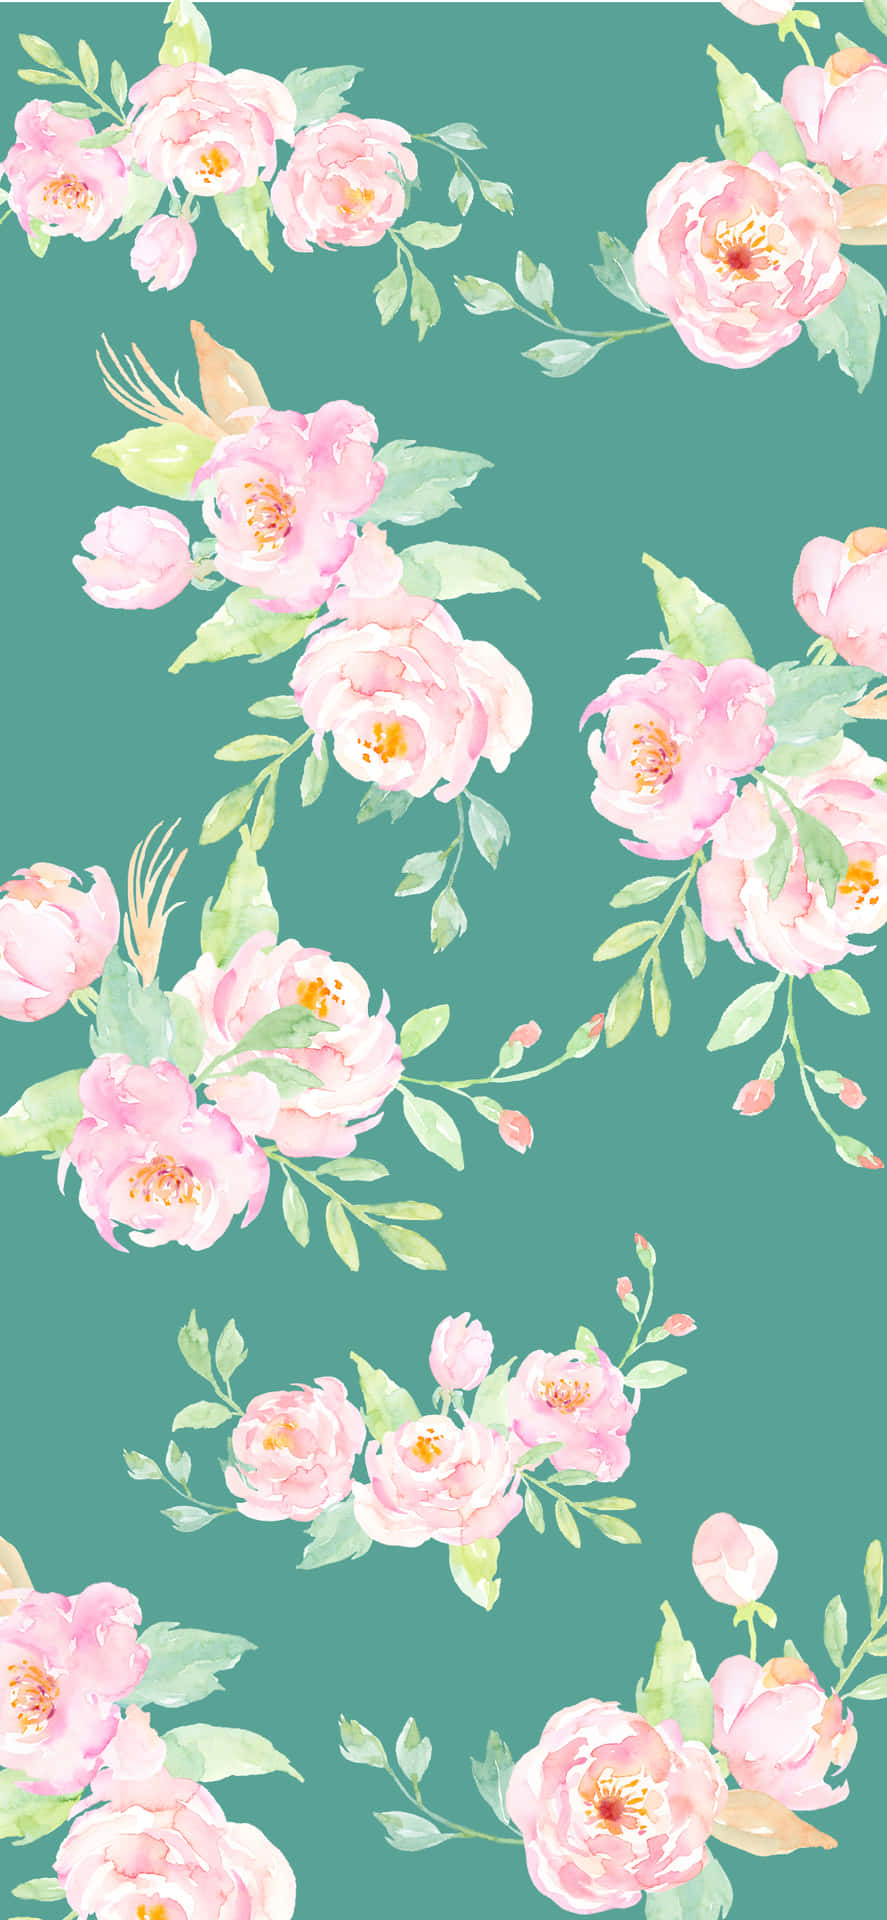 Spring Iphone Background